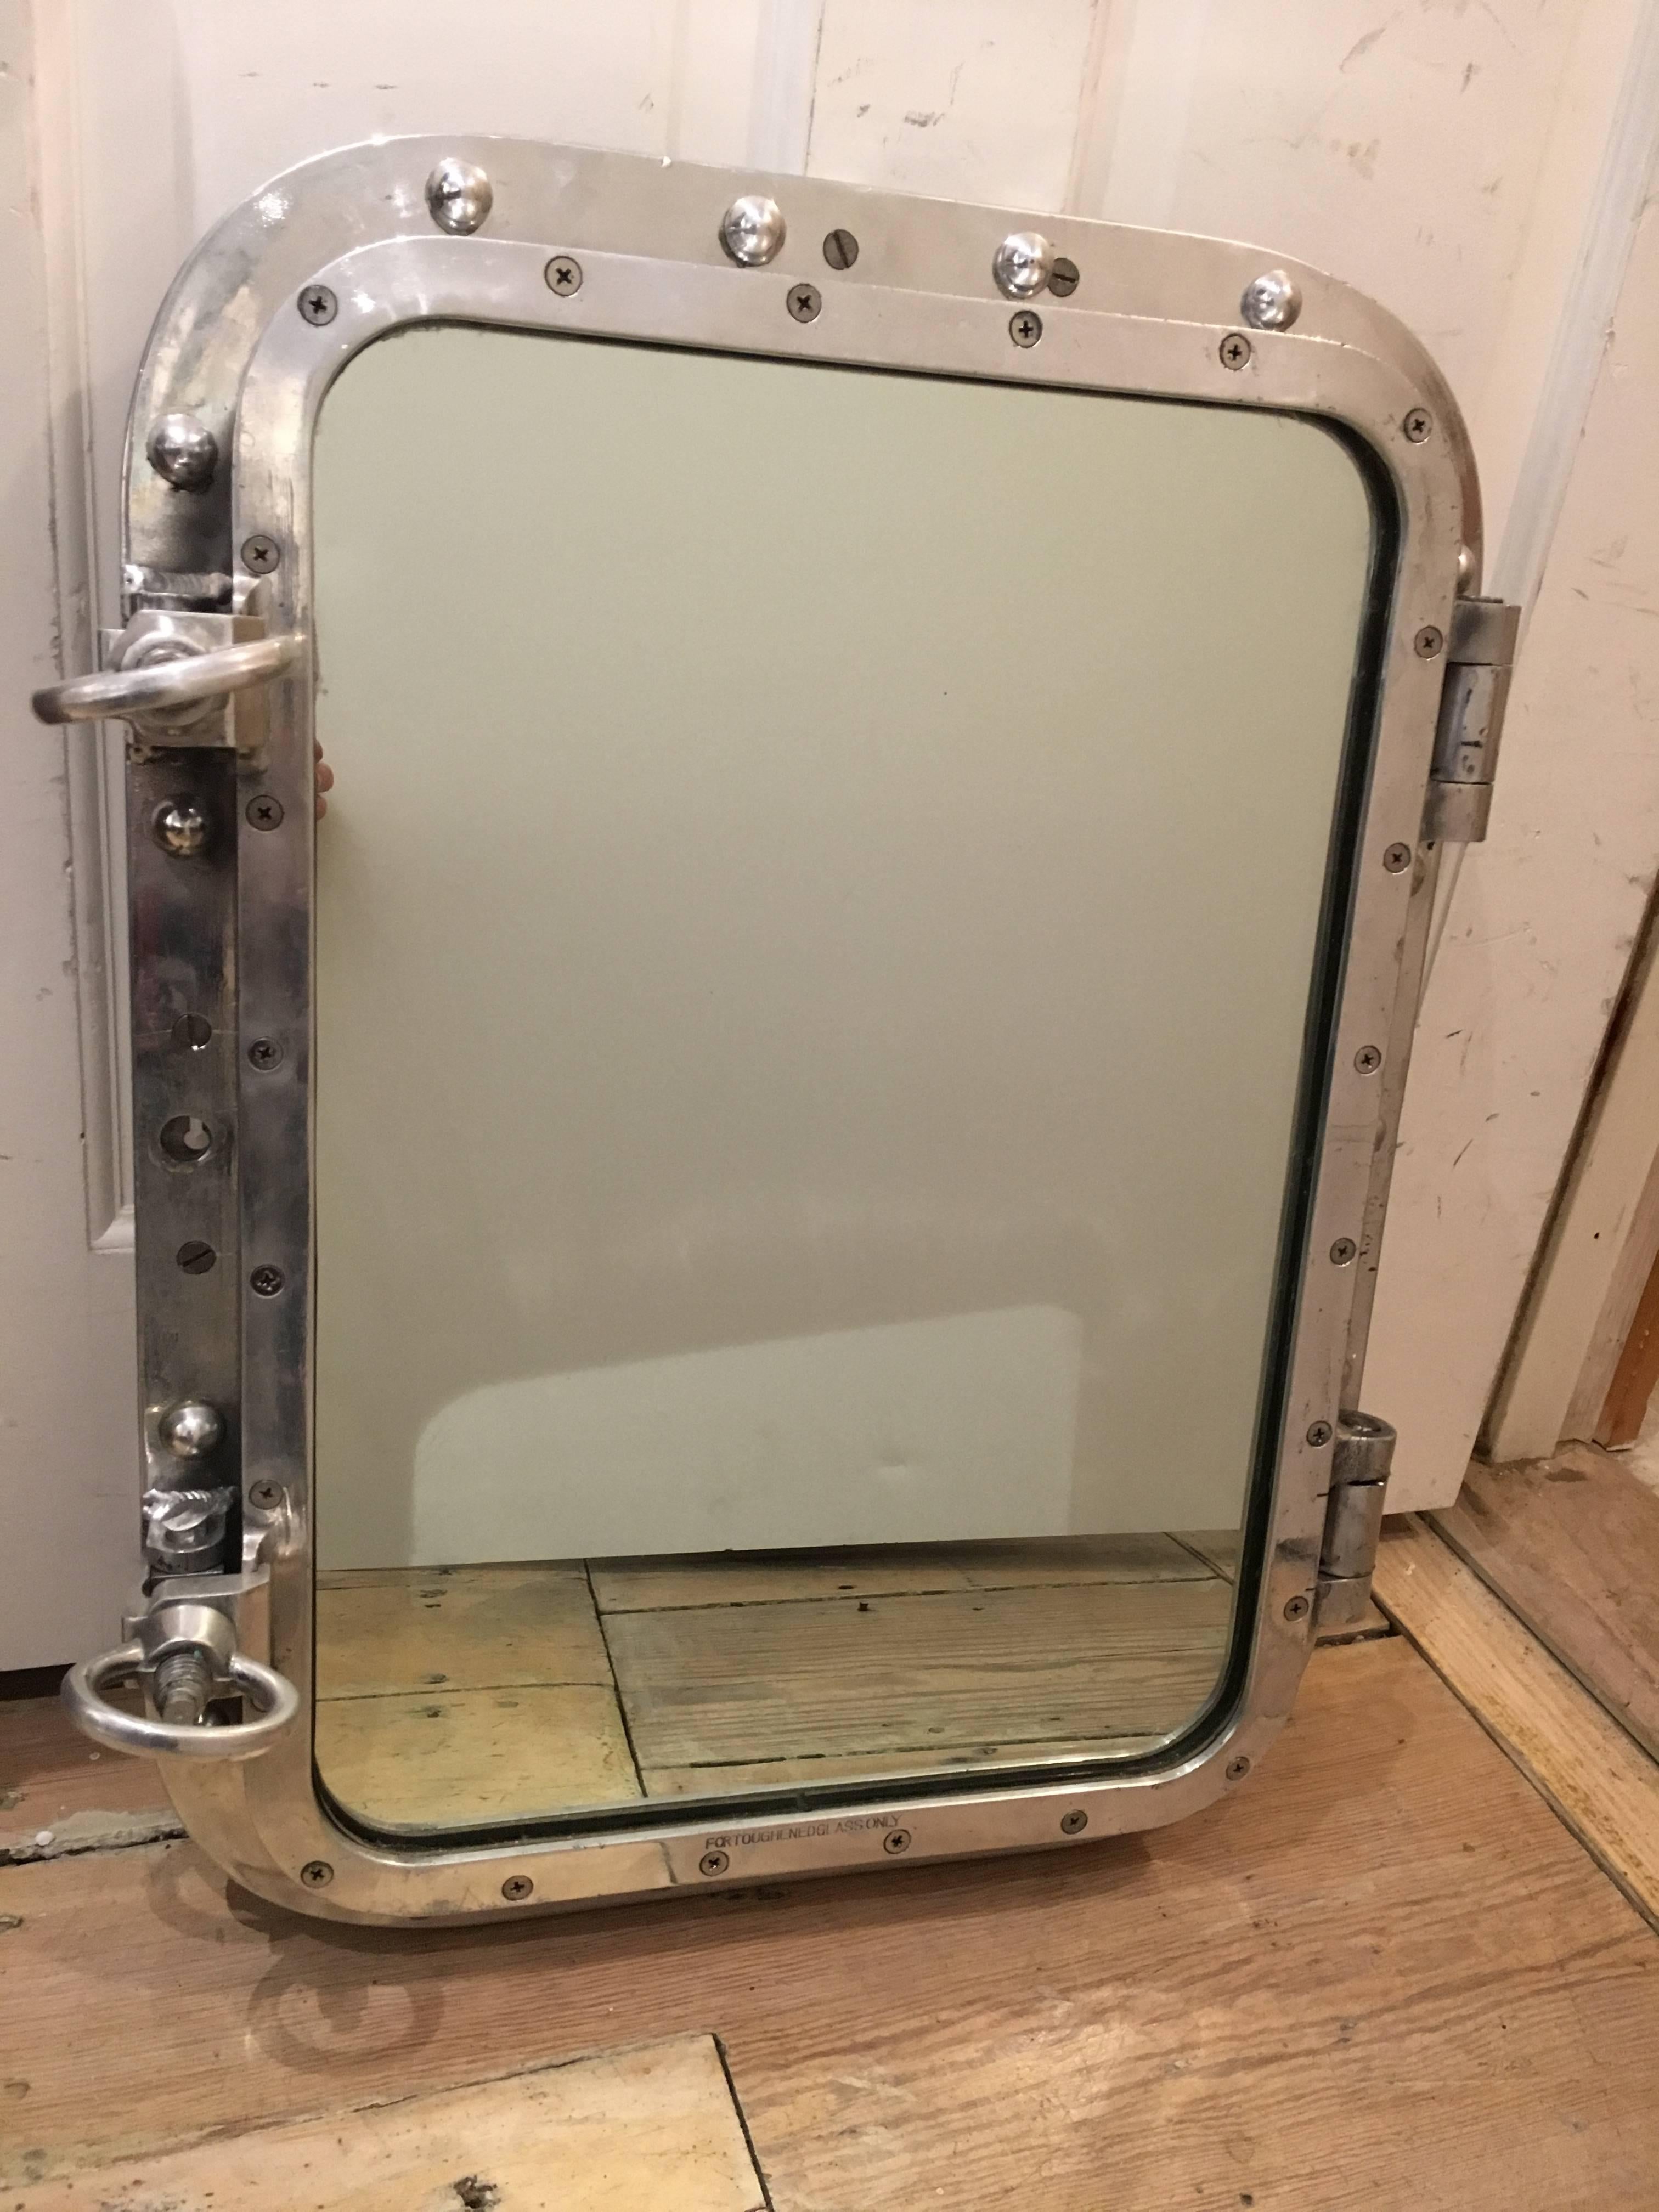 Original ship's porthole window converted to a mirror with operational 'keys' (as in the mirror or window will open).  Great to use over a recessed medicine cabinet or even as a dry bar tray.  Chrome, refinished.

